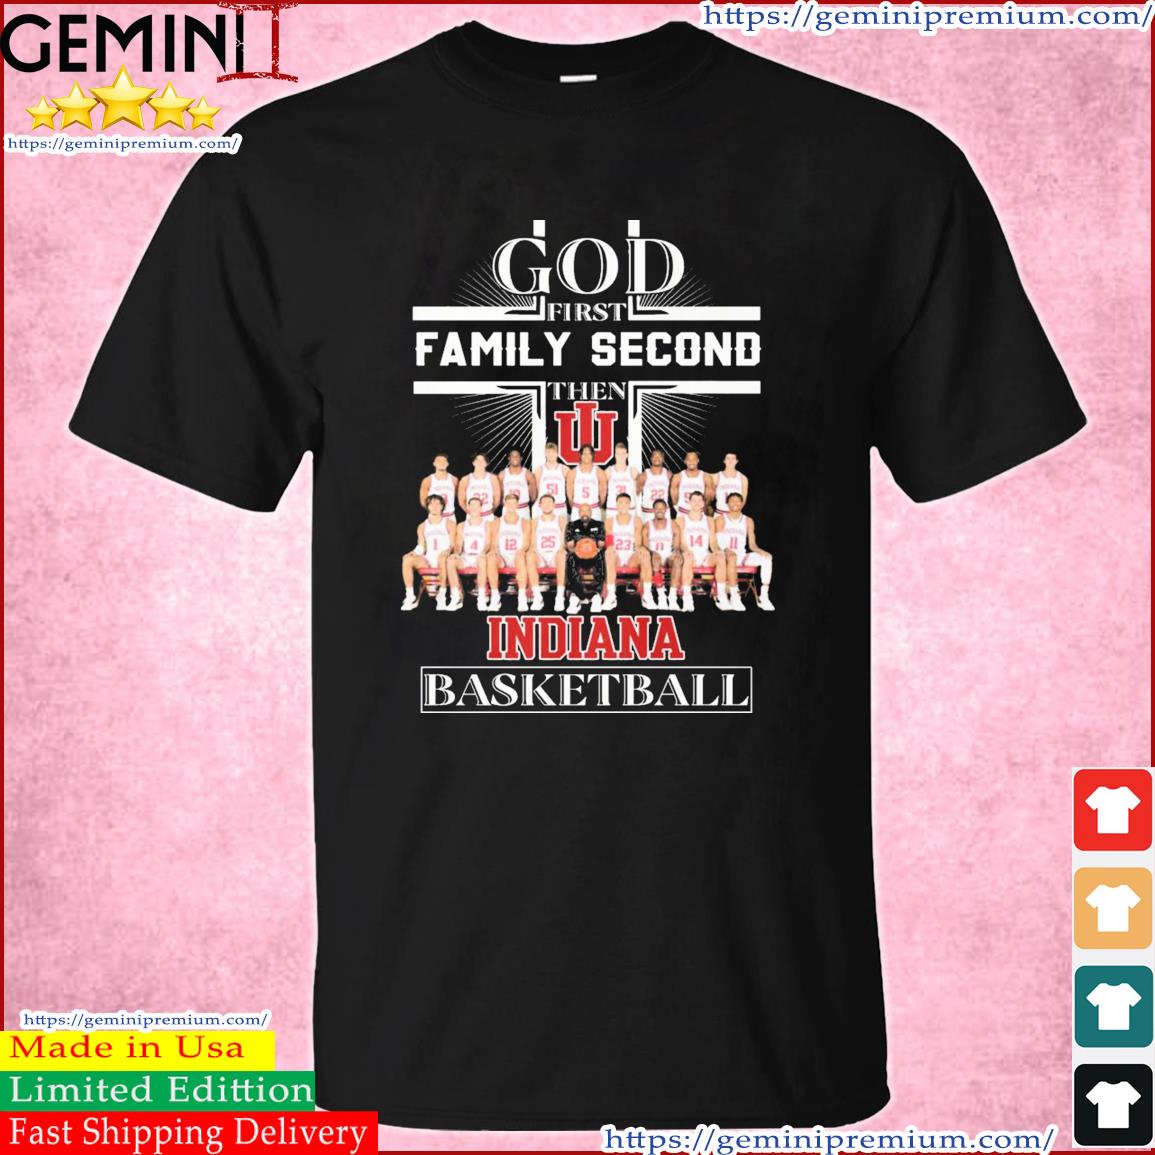 God Family Second First Then Indiana Men's Basketball All Team Shirt